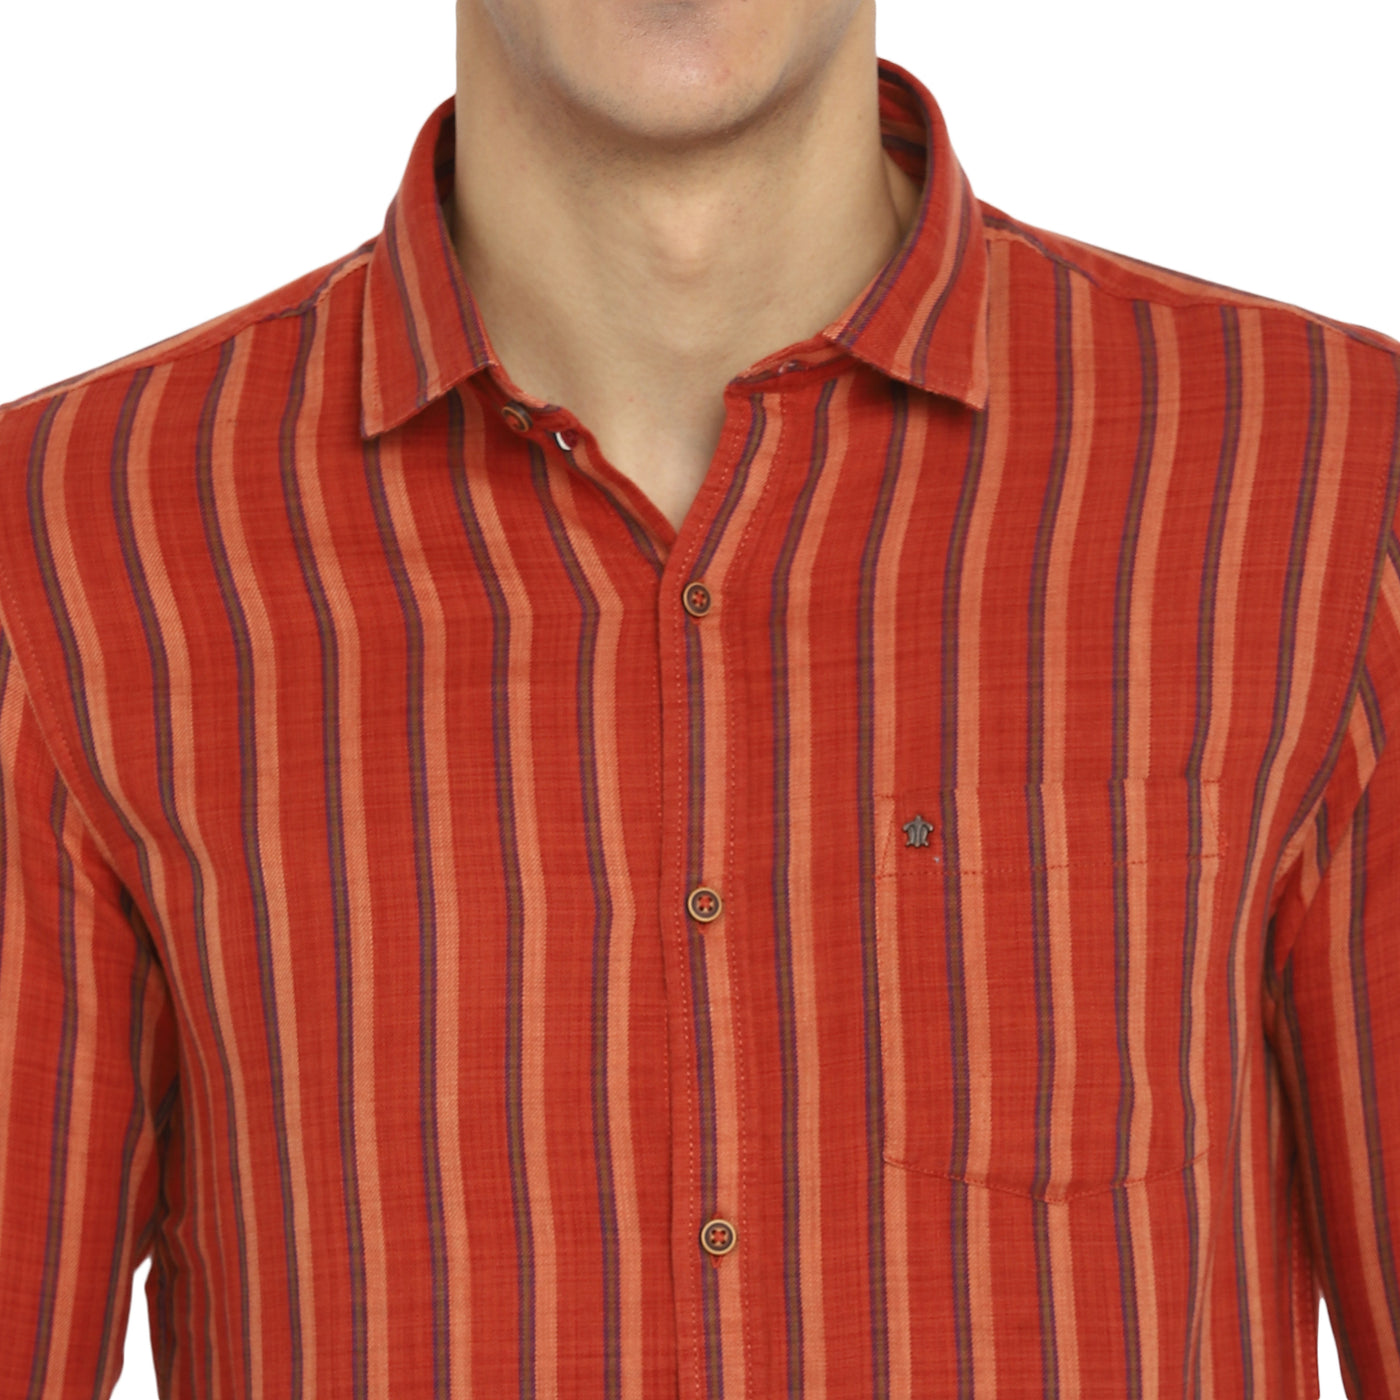 Cotton Blend Striped Regular Fit Red Casual Shirts